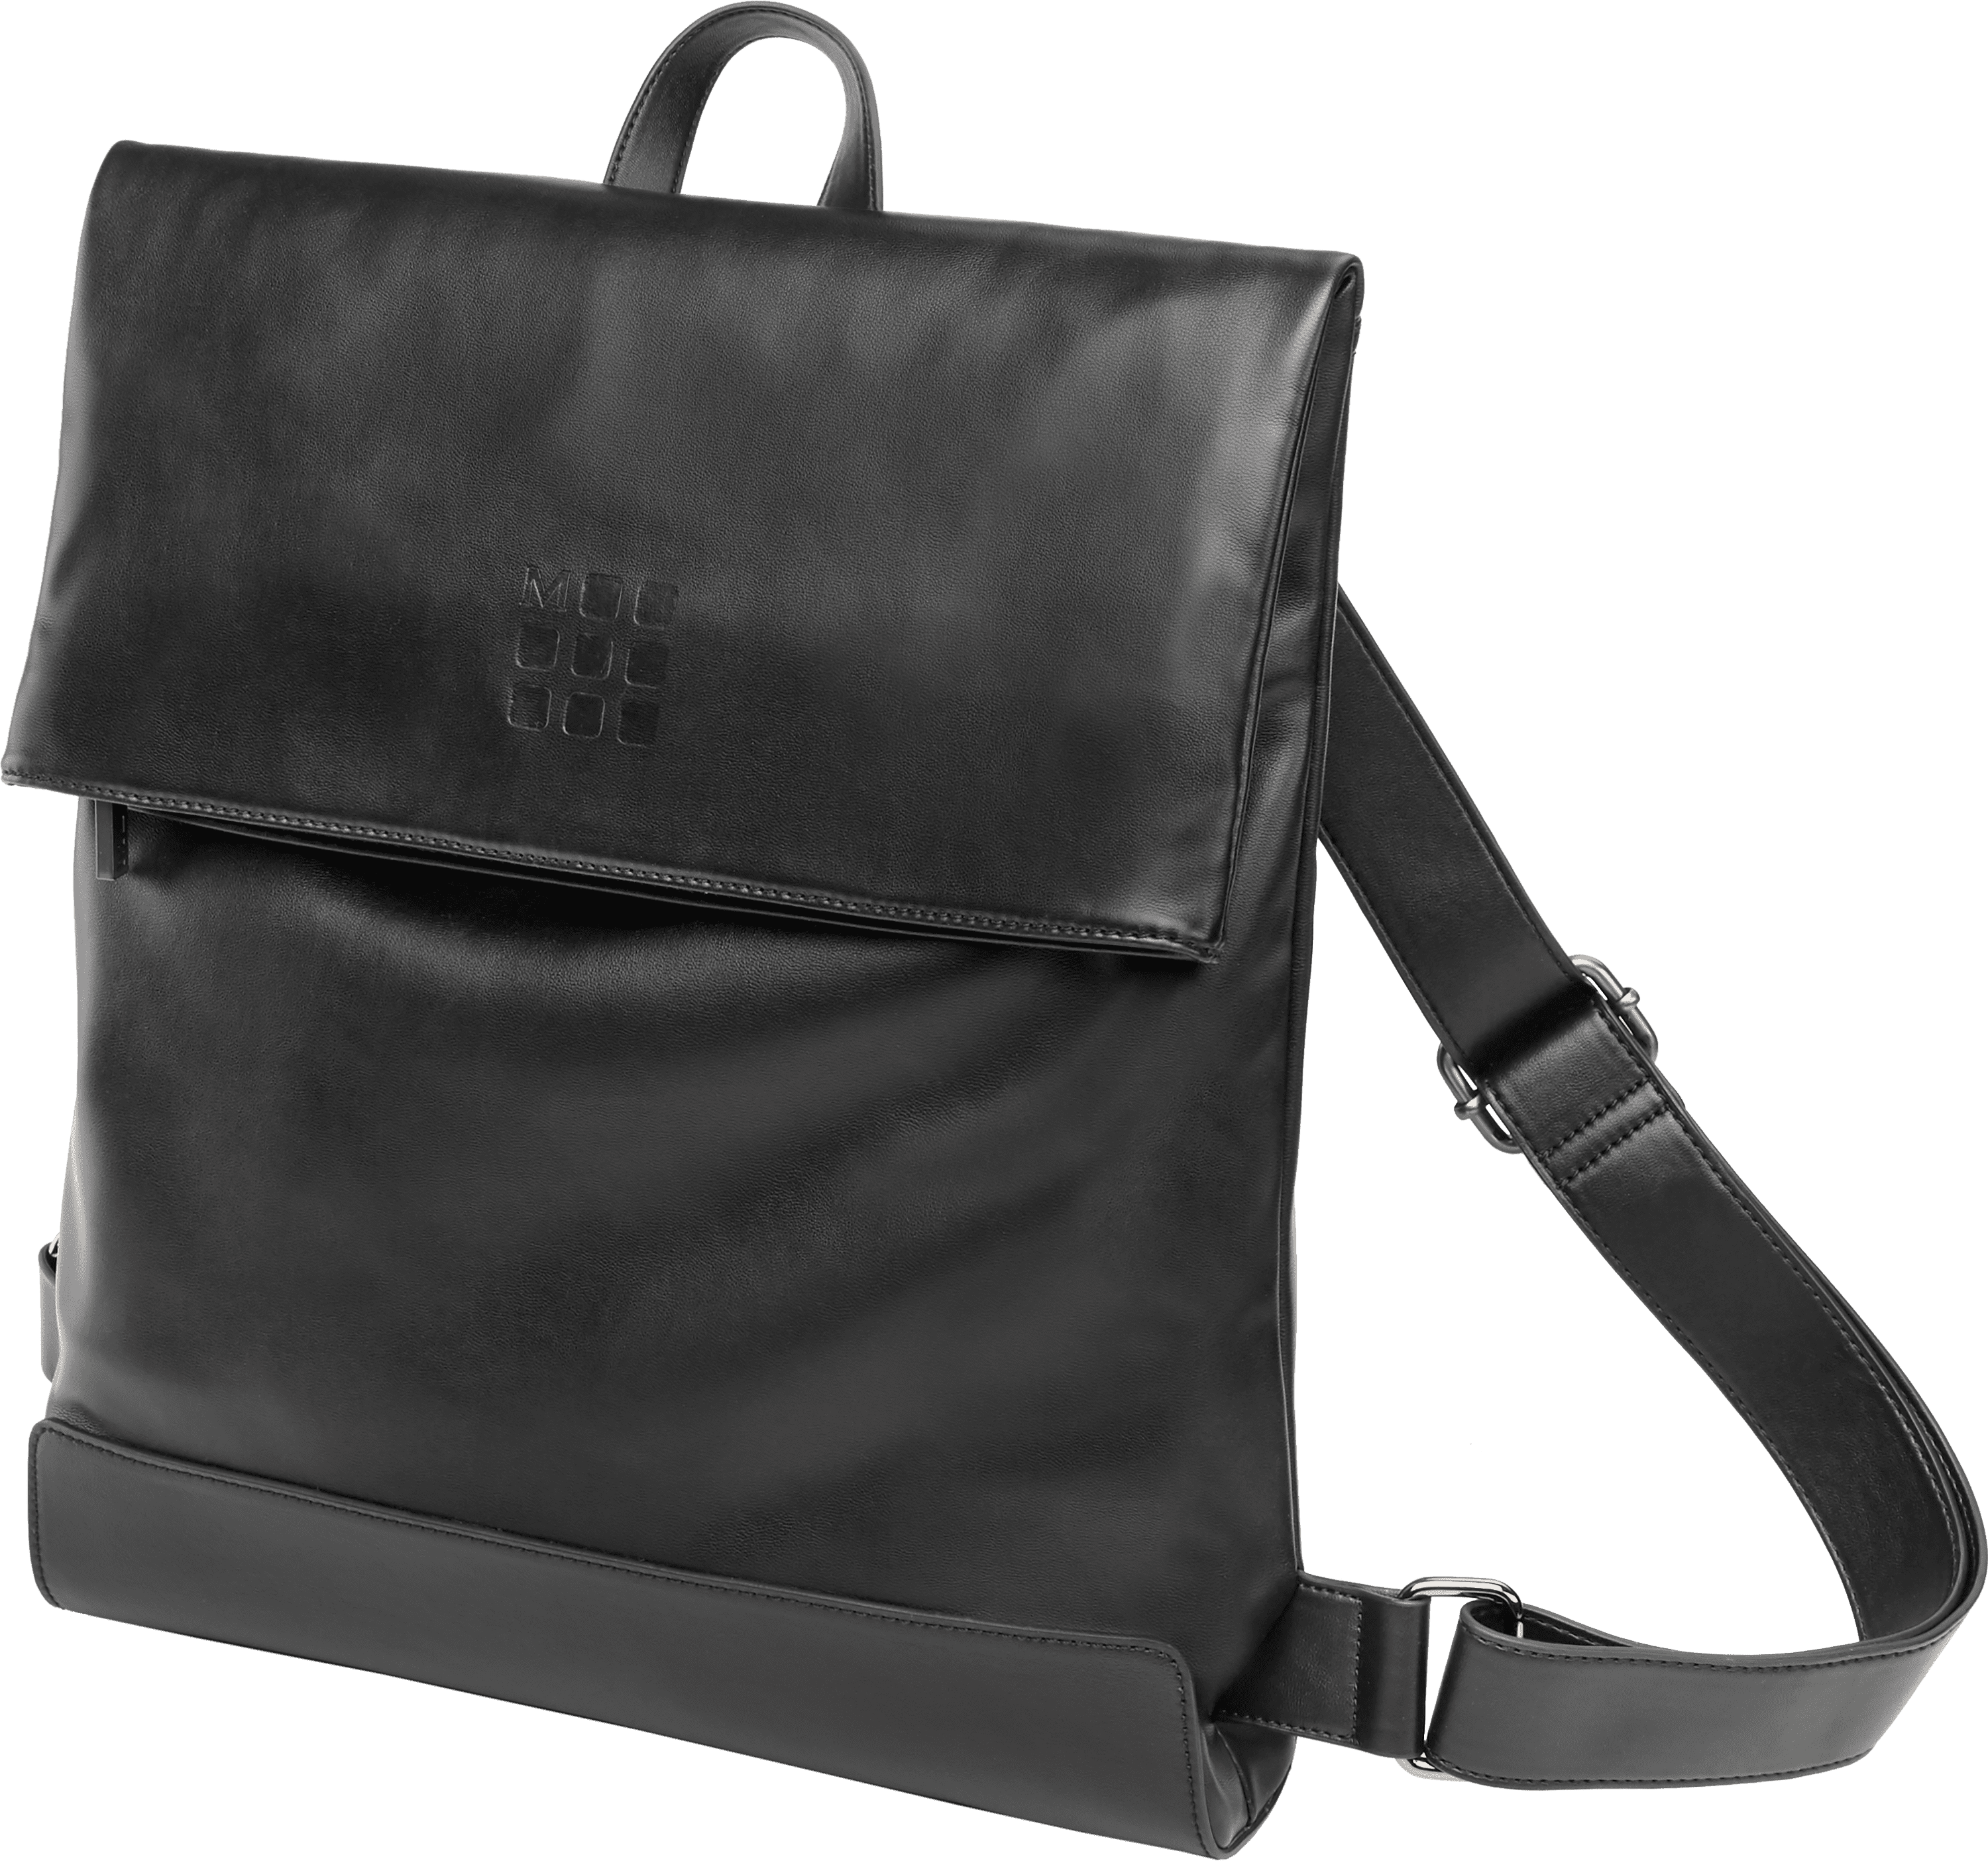 Moleskine to Offer Leather Bags